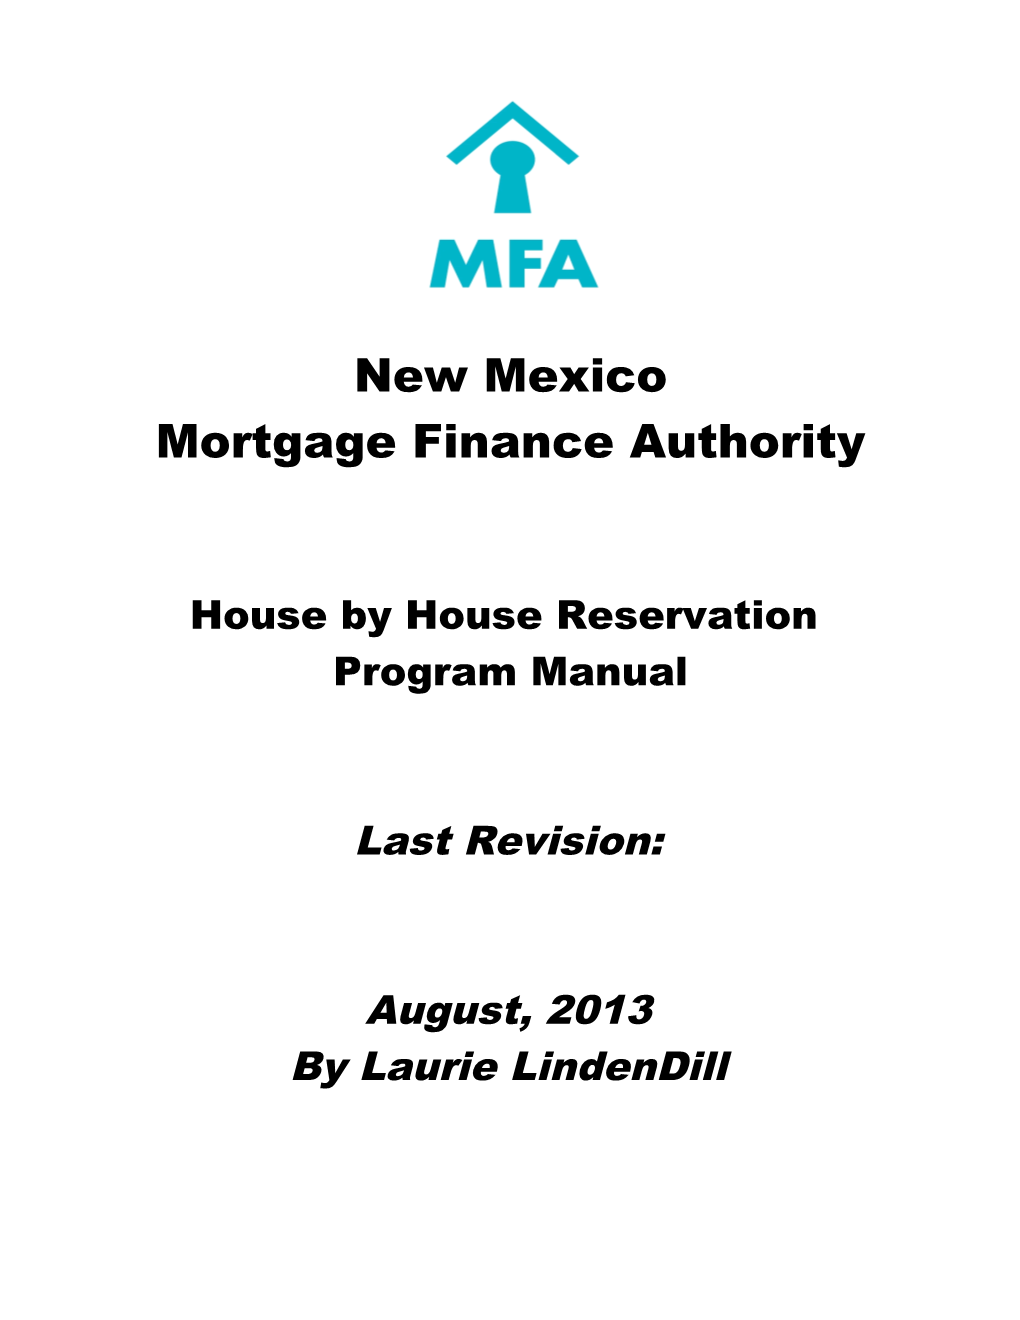 Mortgage Finance Authority